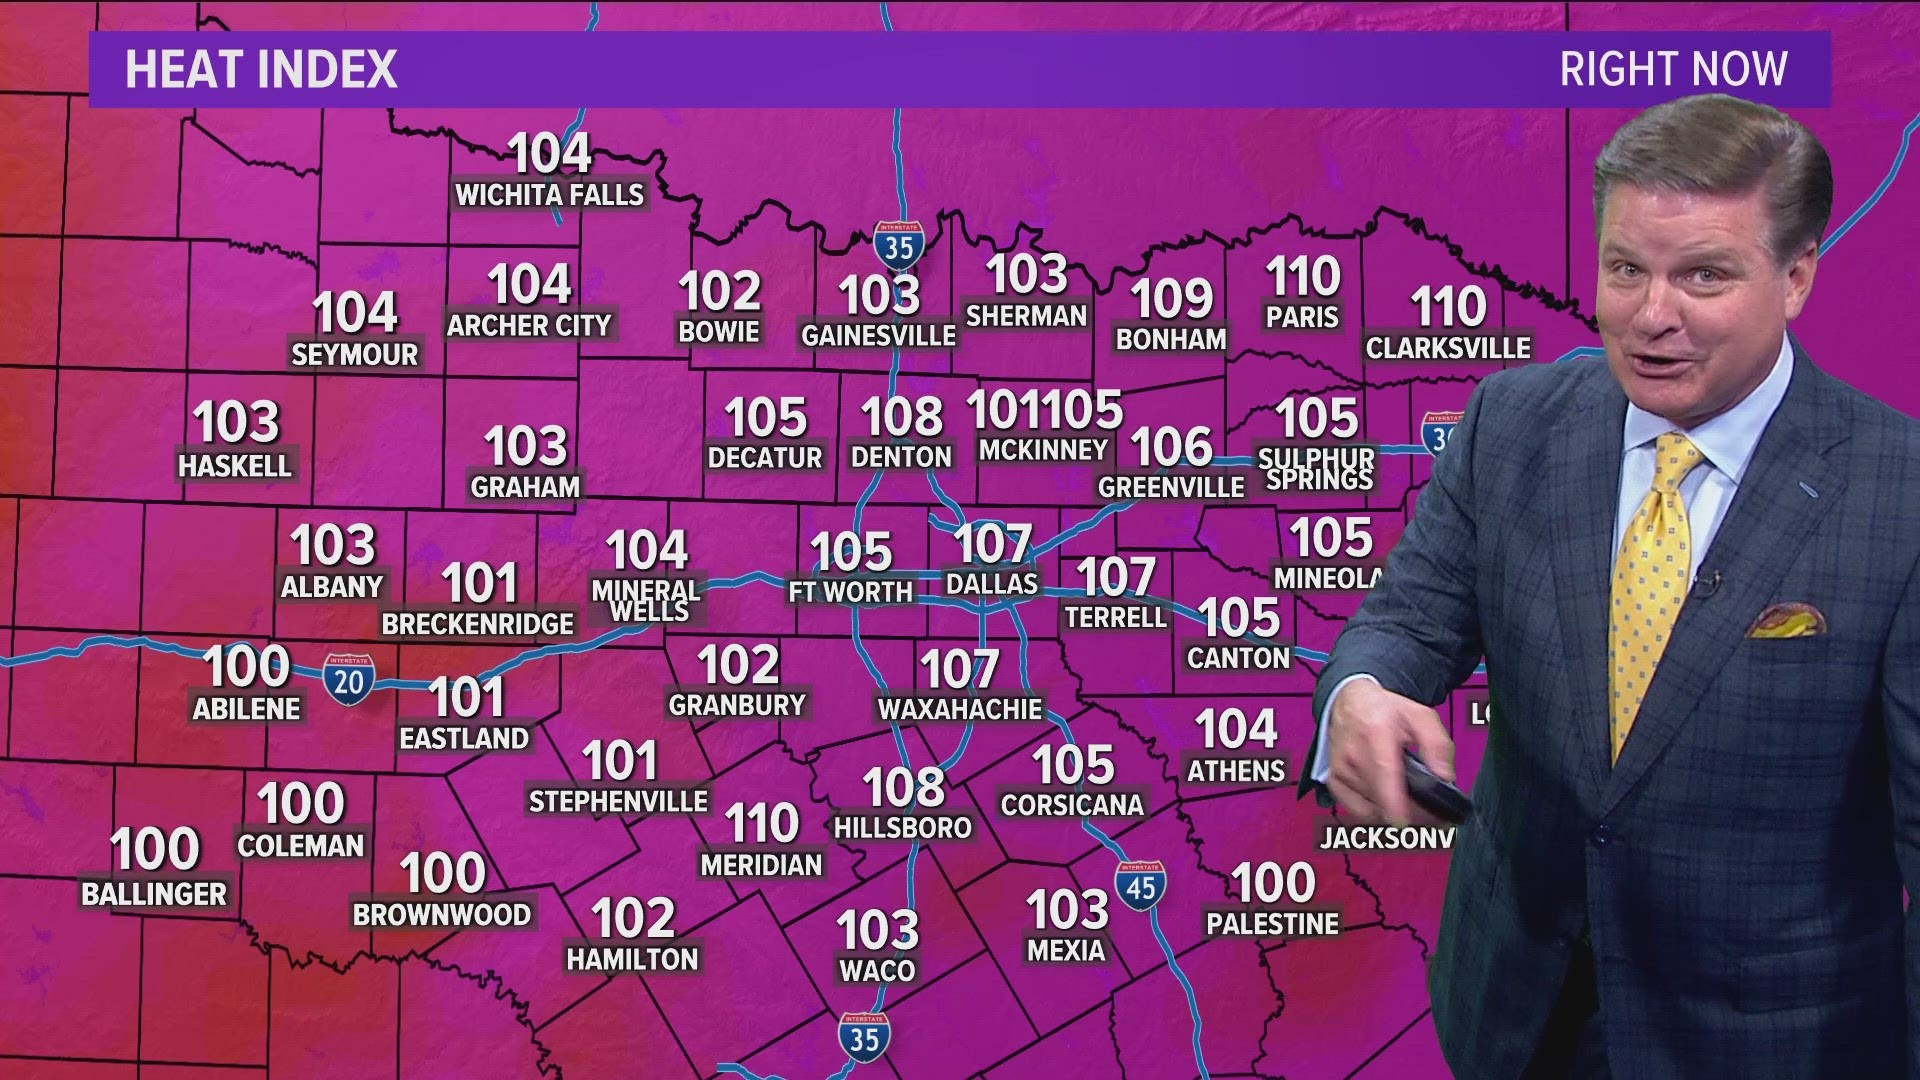 Meteorologist Pete Delkus had some fun with a typo on the heat index map. Don't worry, it was only 105.